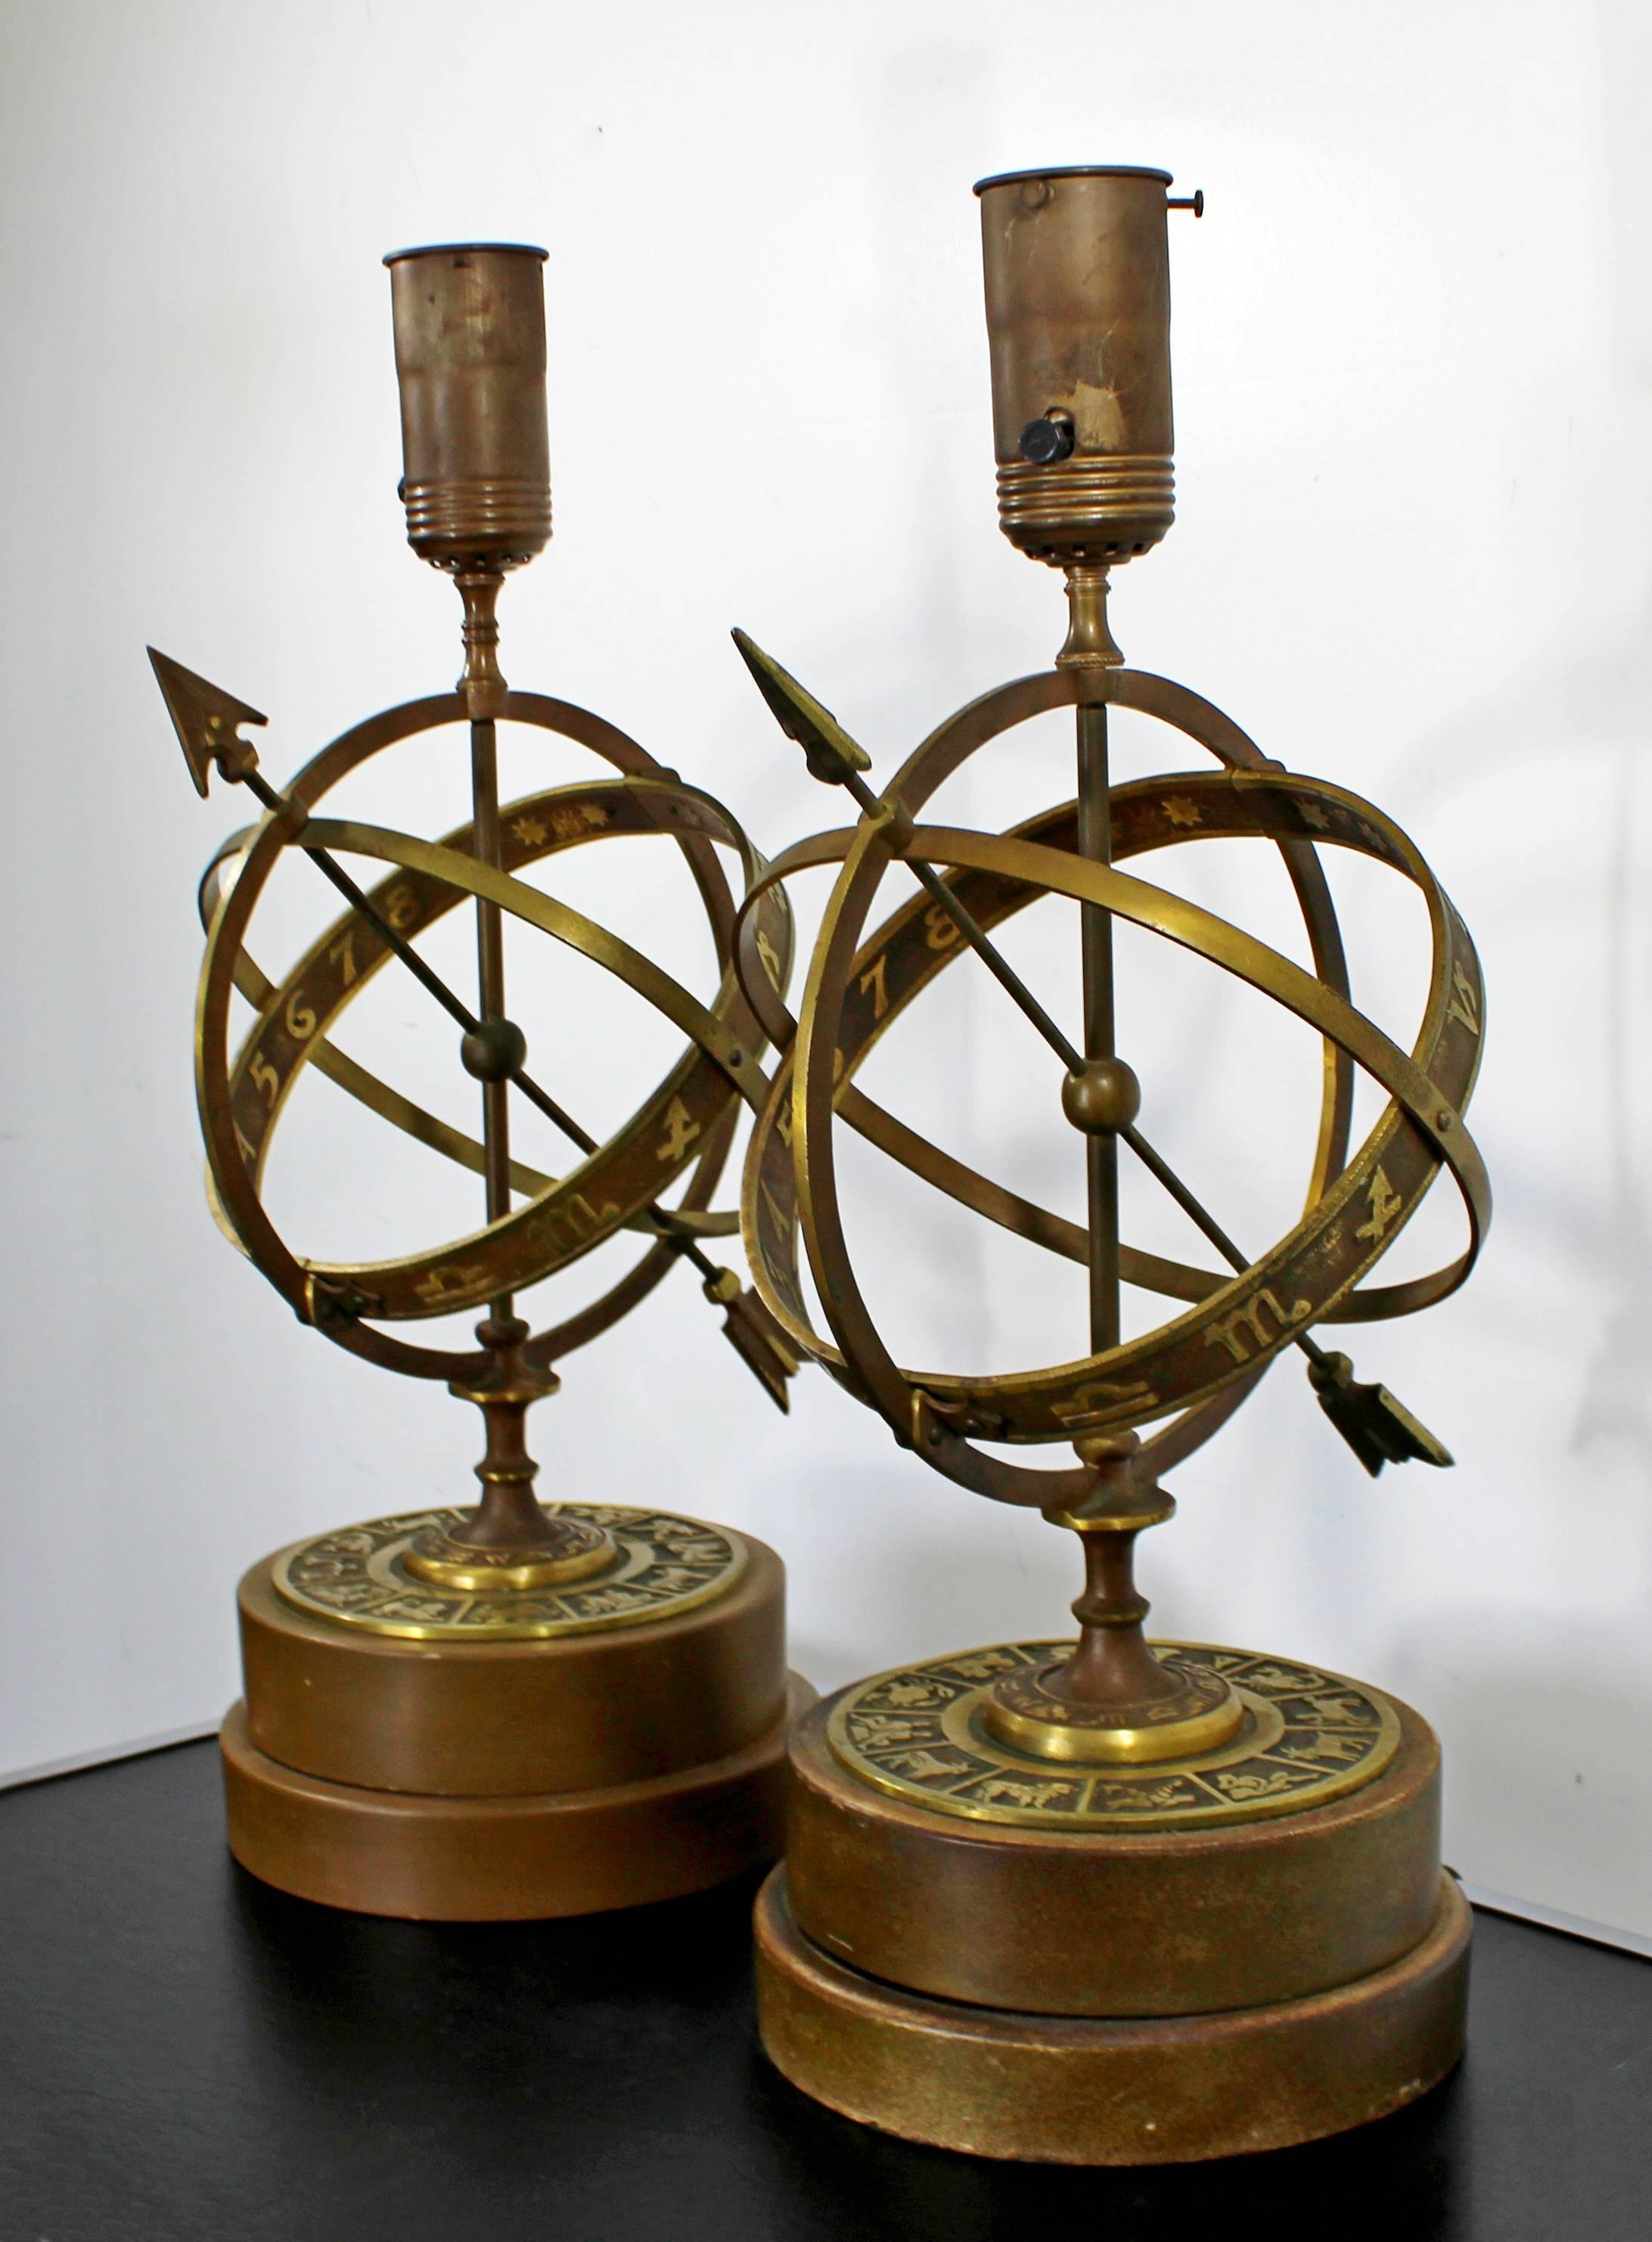 American Mid-Century Modern Pair of Frederick Cooper Astrological Armillary Table Lamps